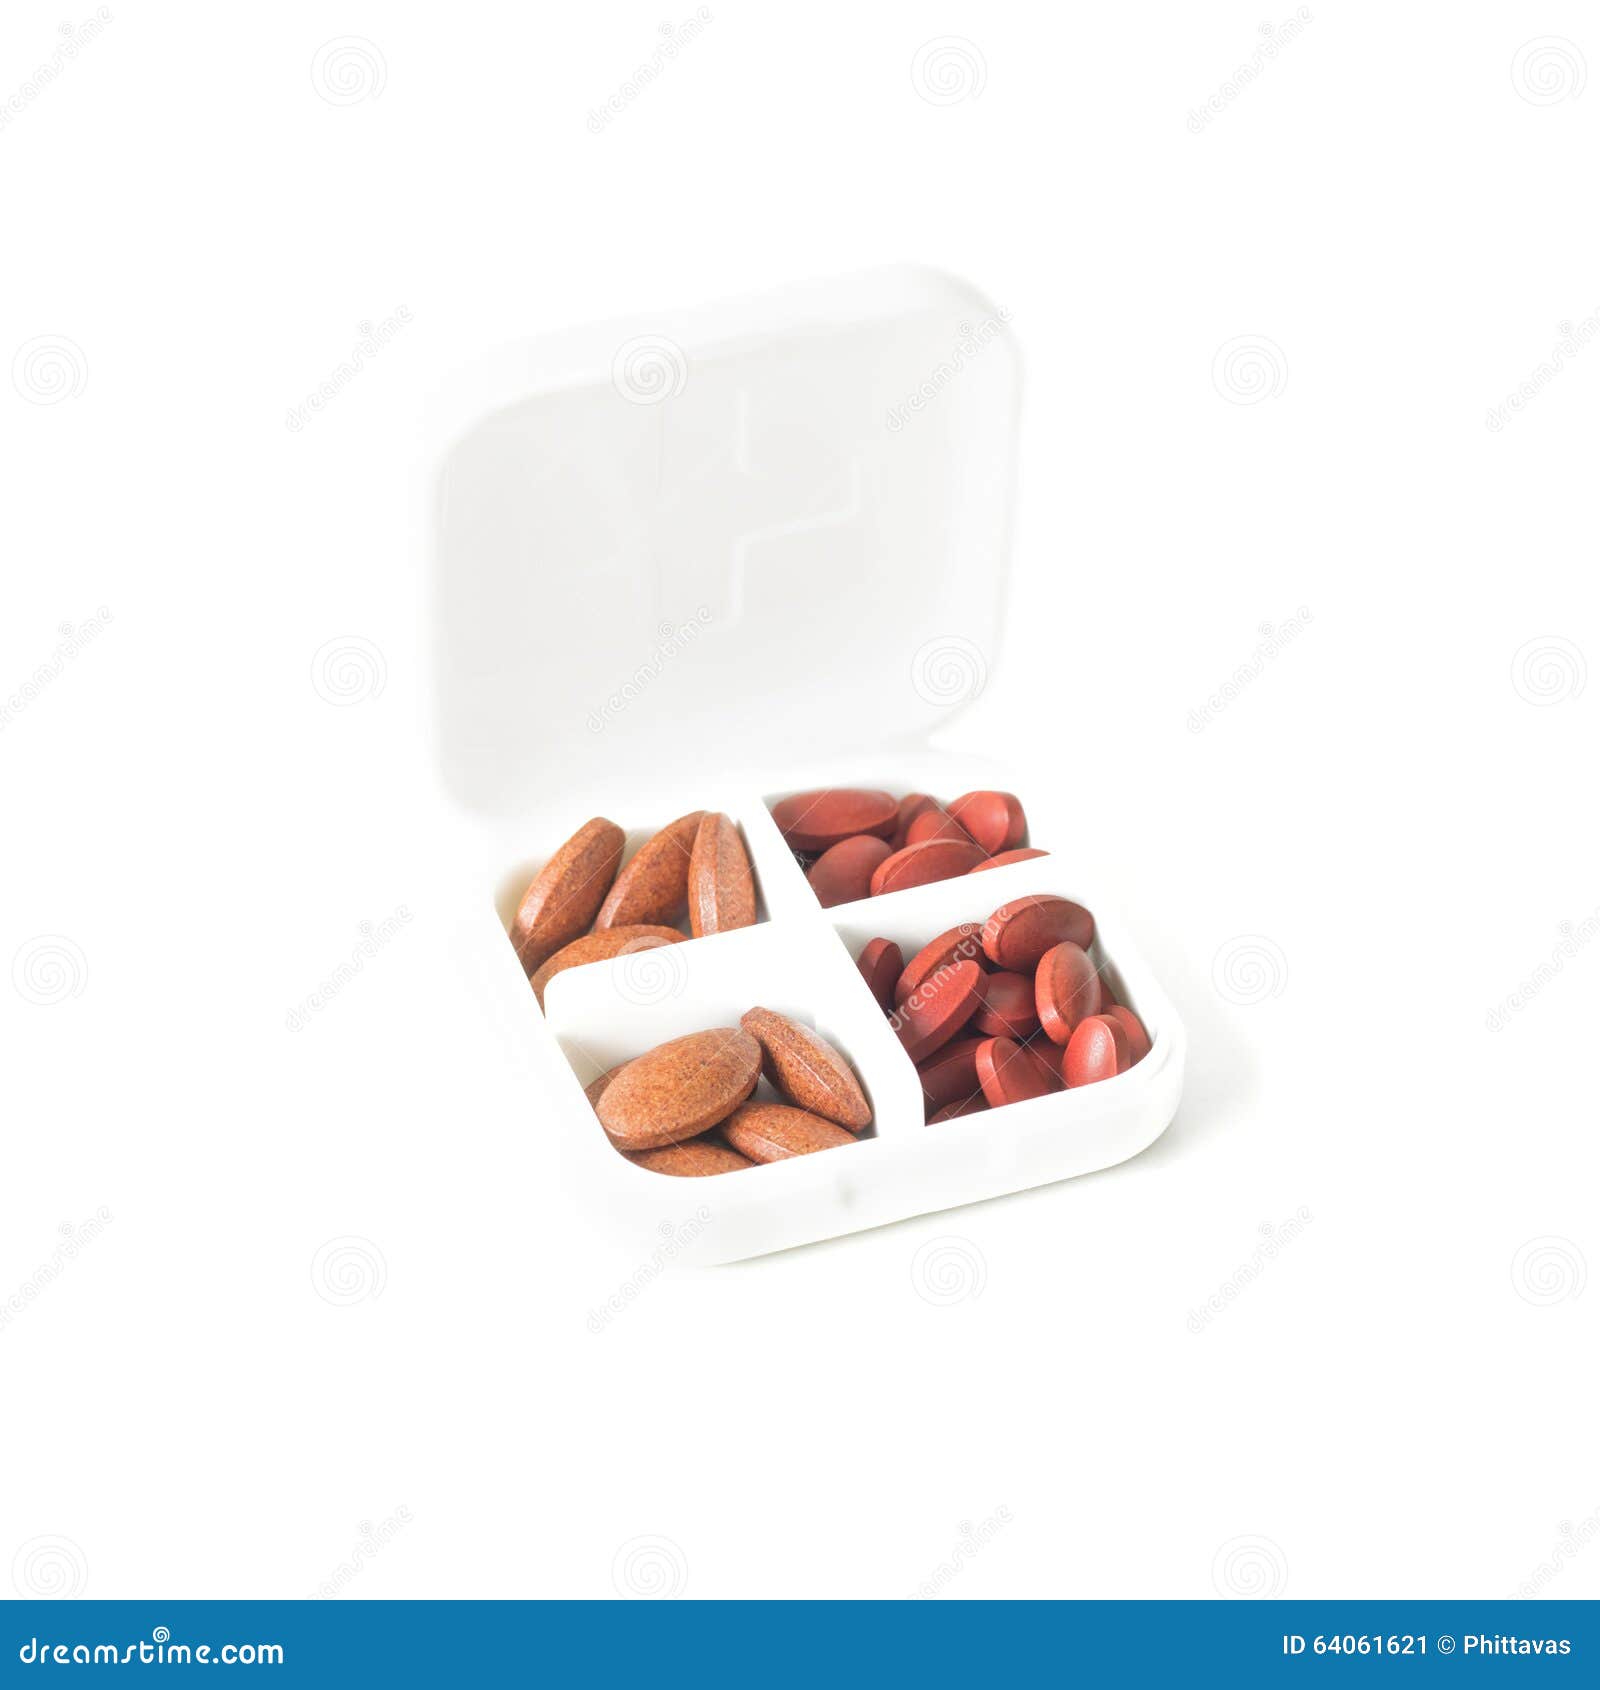 buy research chemicals 4-aco-dmt fumarate dosage